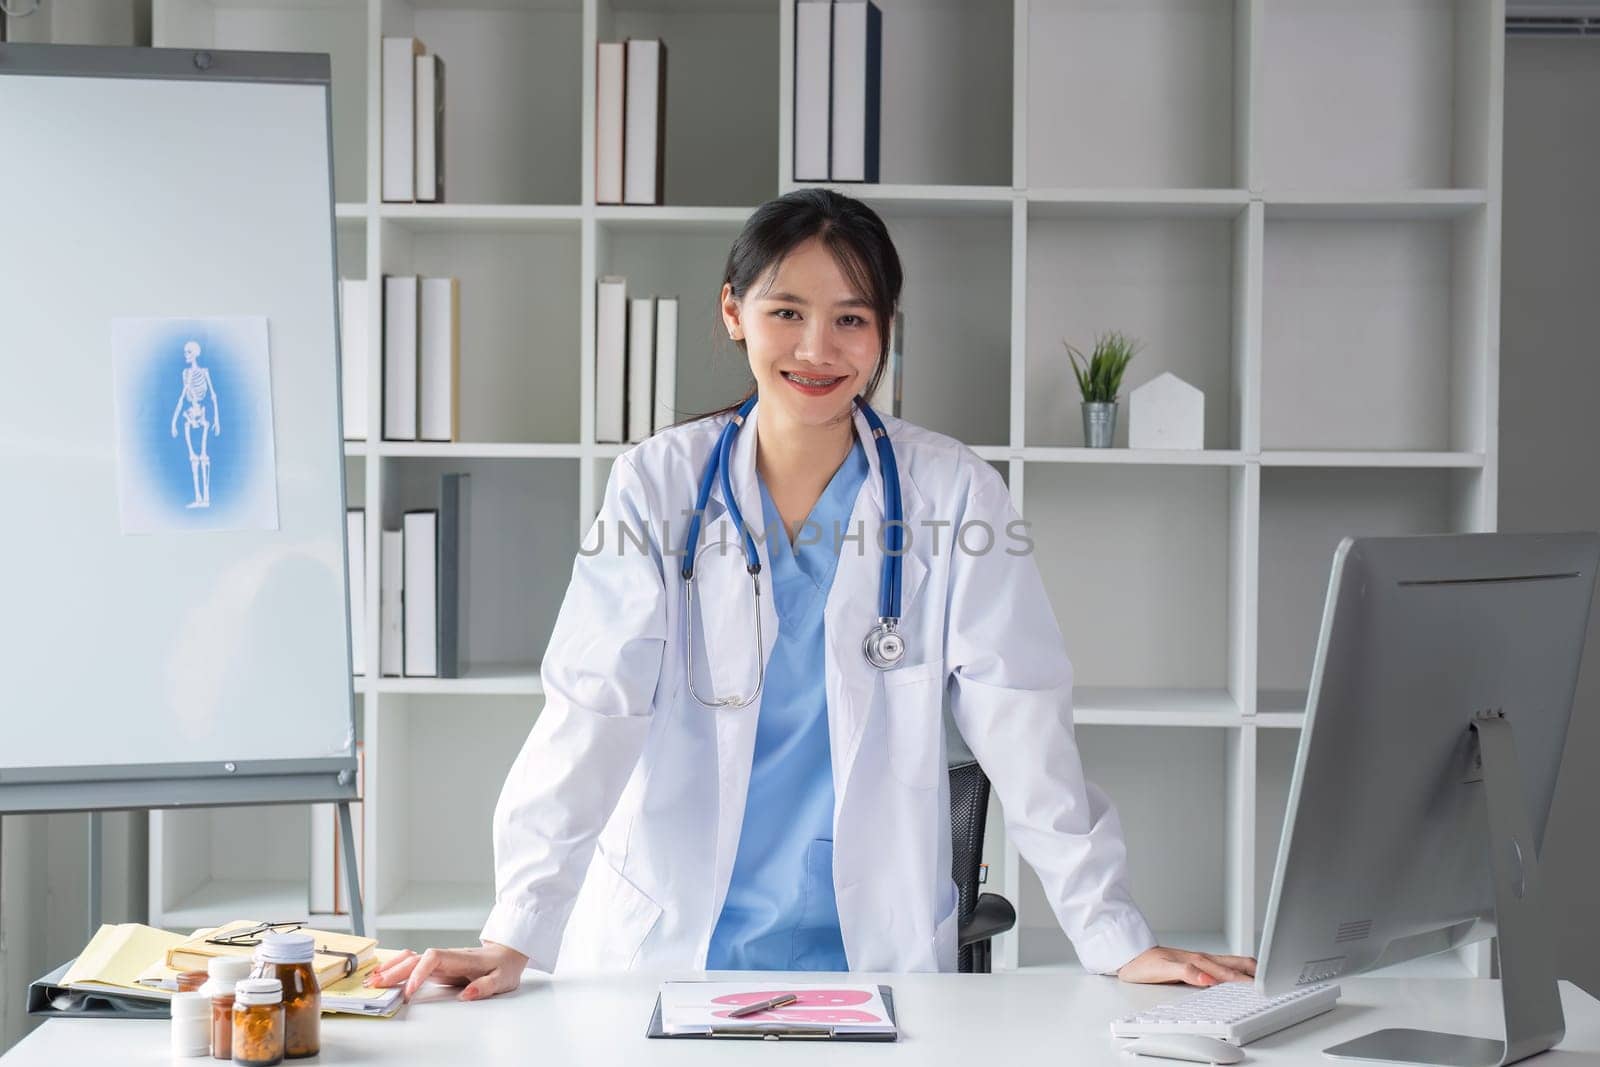 Portrait of a smiling female doctor wearing a medical coat and stethoscope in a hospital office. Medical and healthcare concept.